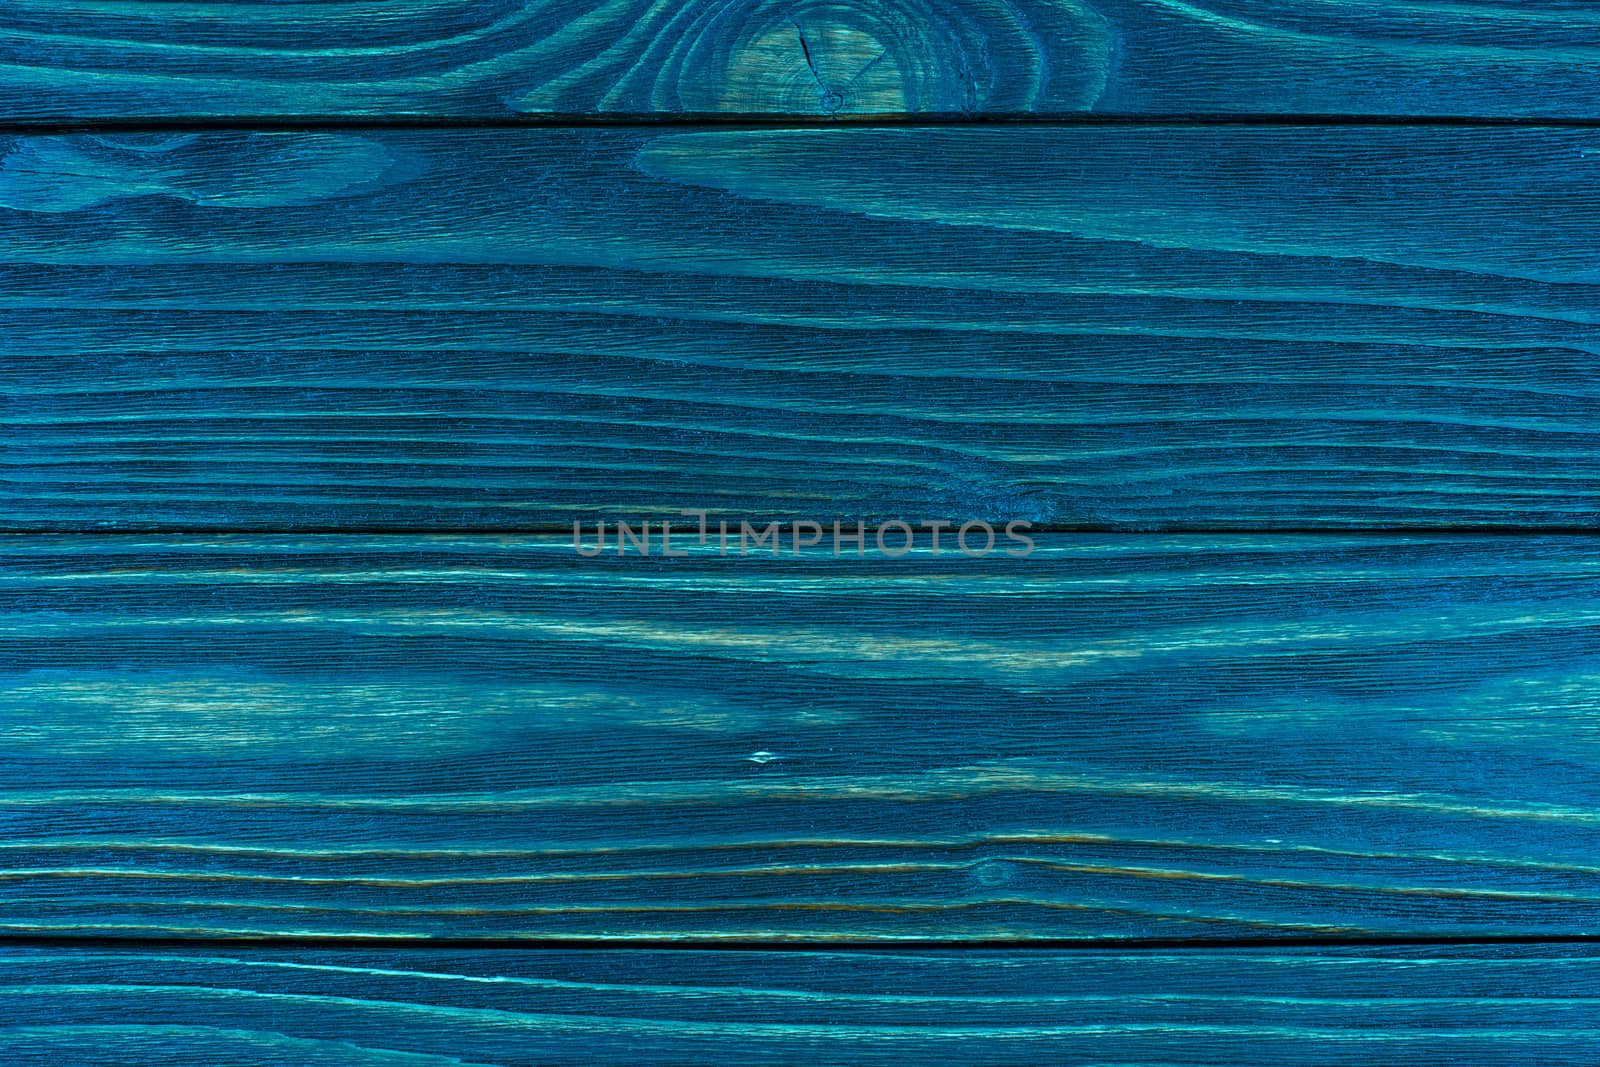 texture of wood blue panel.  by DGolbay